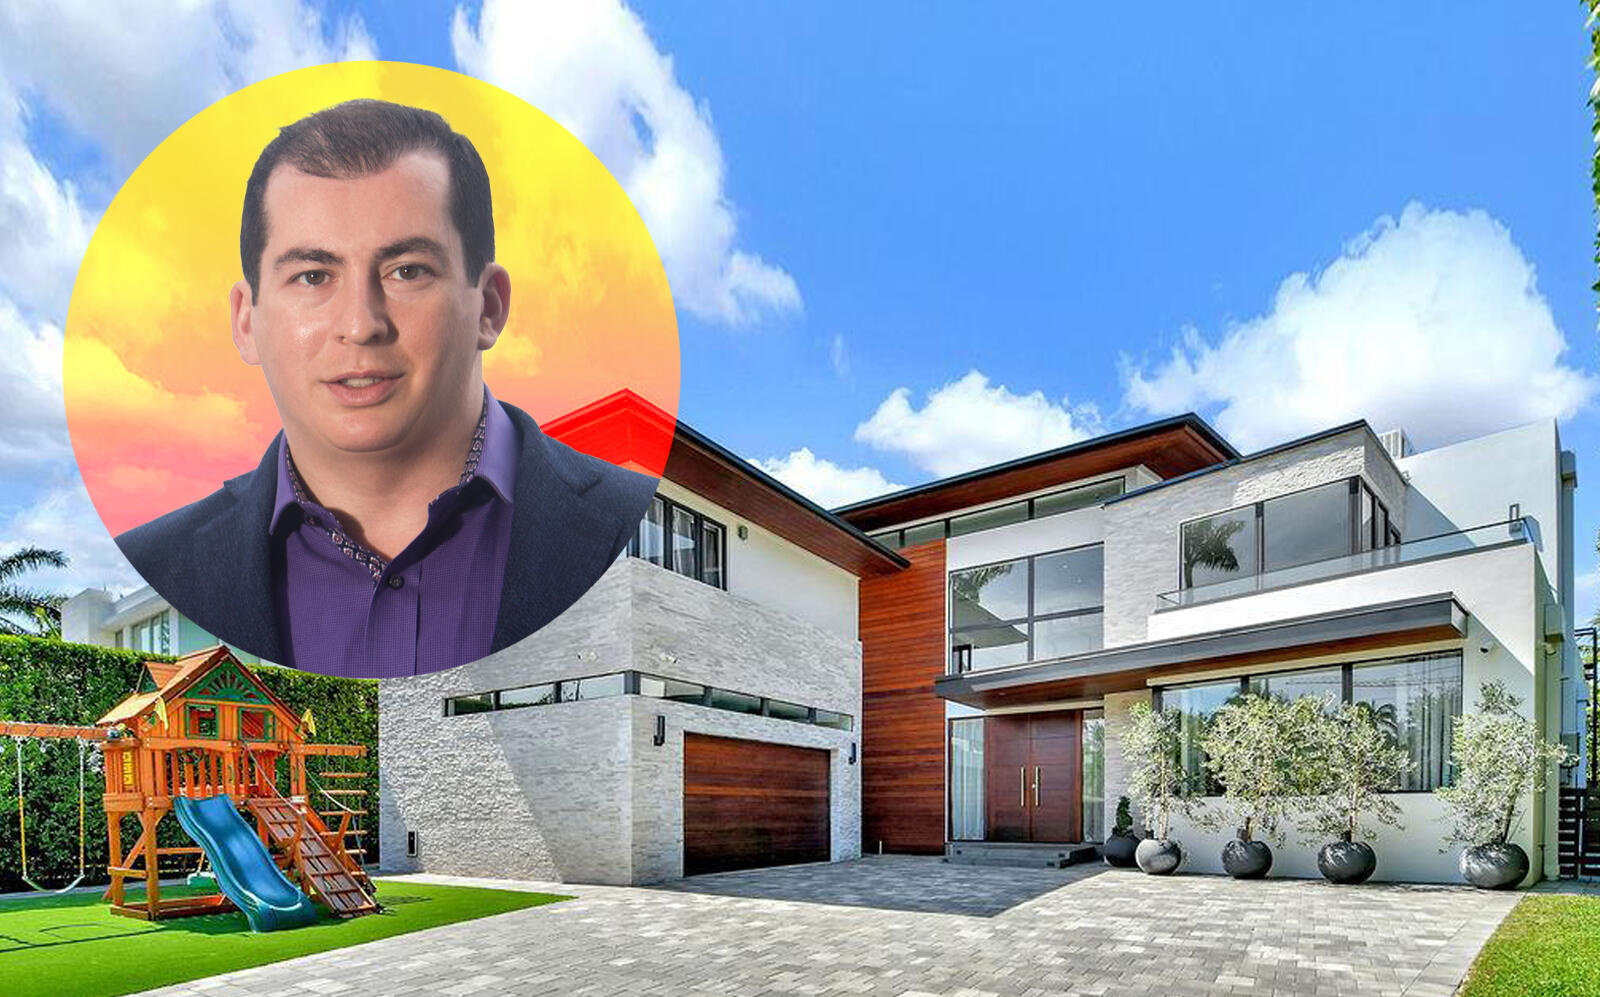 JetSmarter Co-Founder Gennady Barsky and the $8 million home